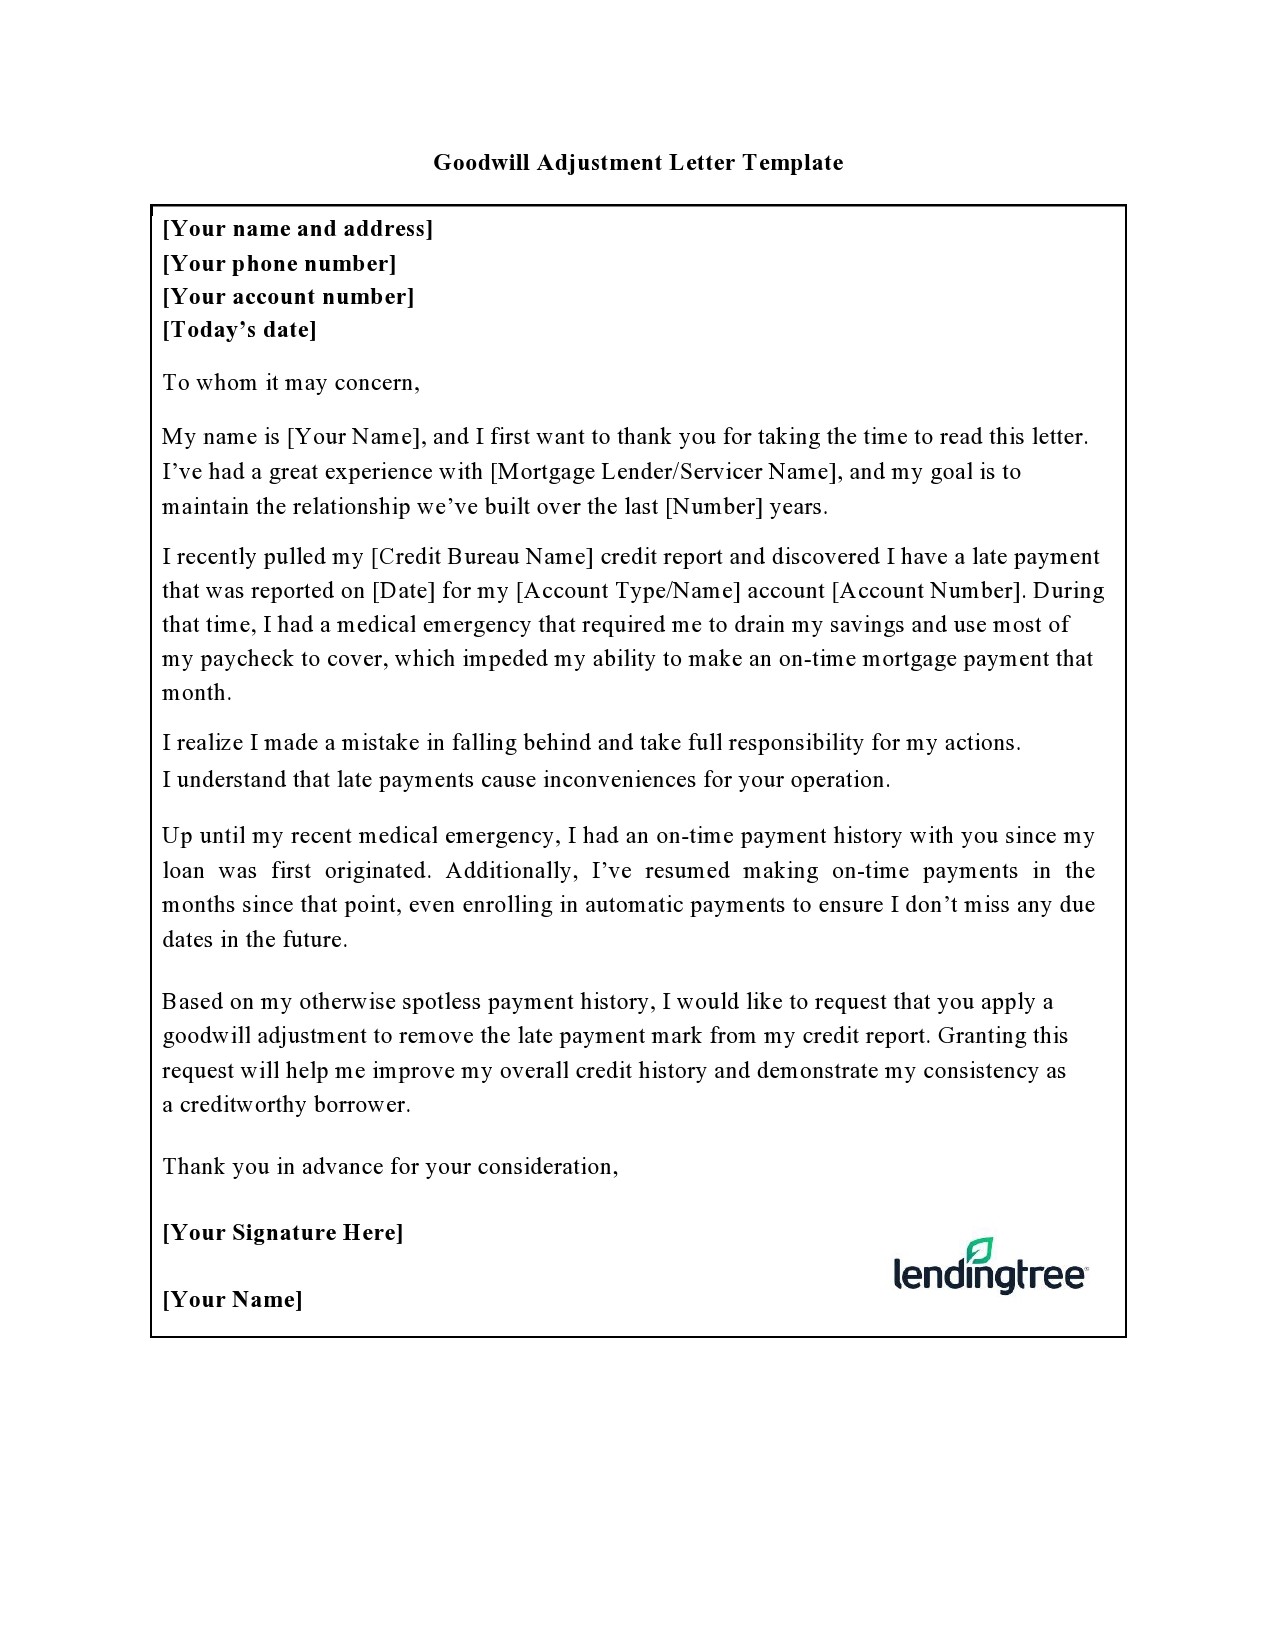 Free goodwill letter template 01